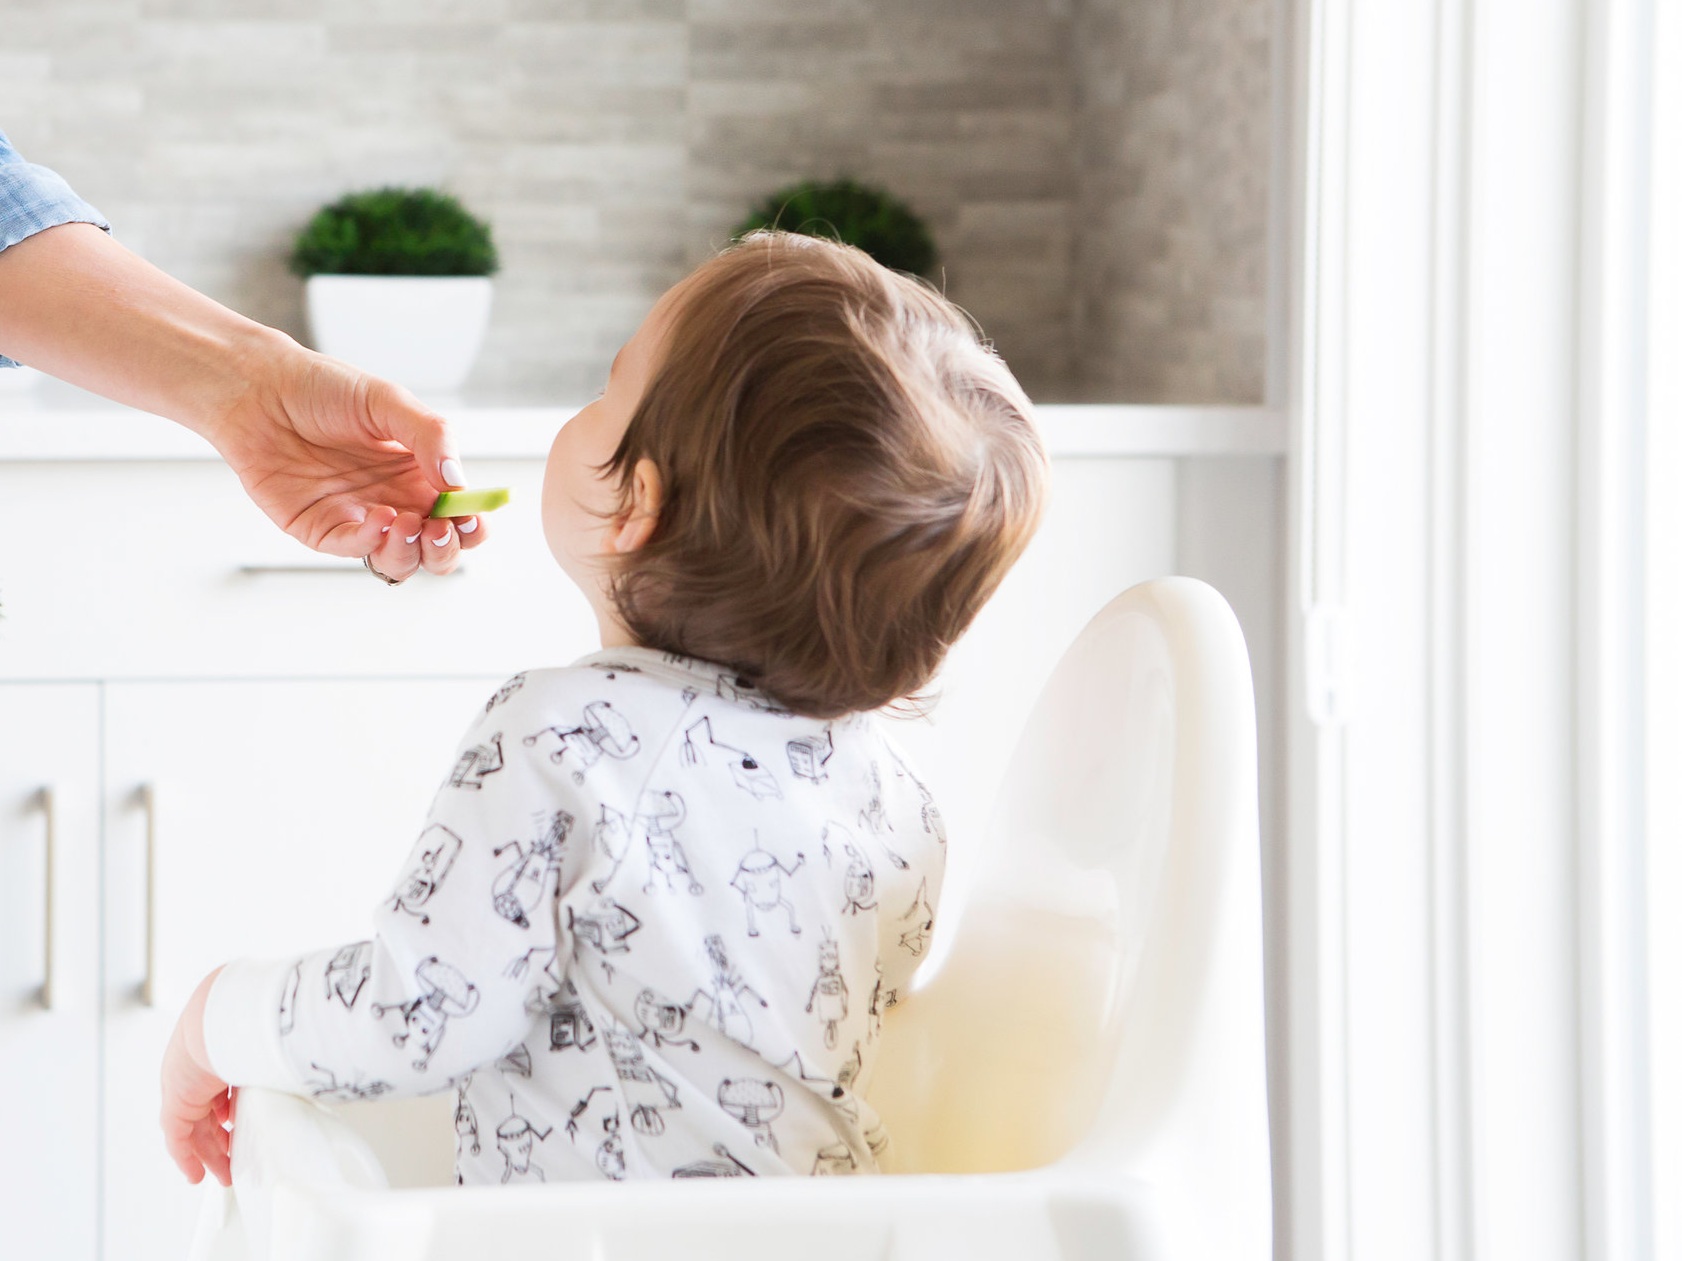 THE SHOCKING TRUTH BEHIND SHELF-STABLE BABY FOOD